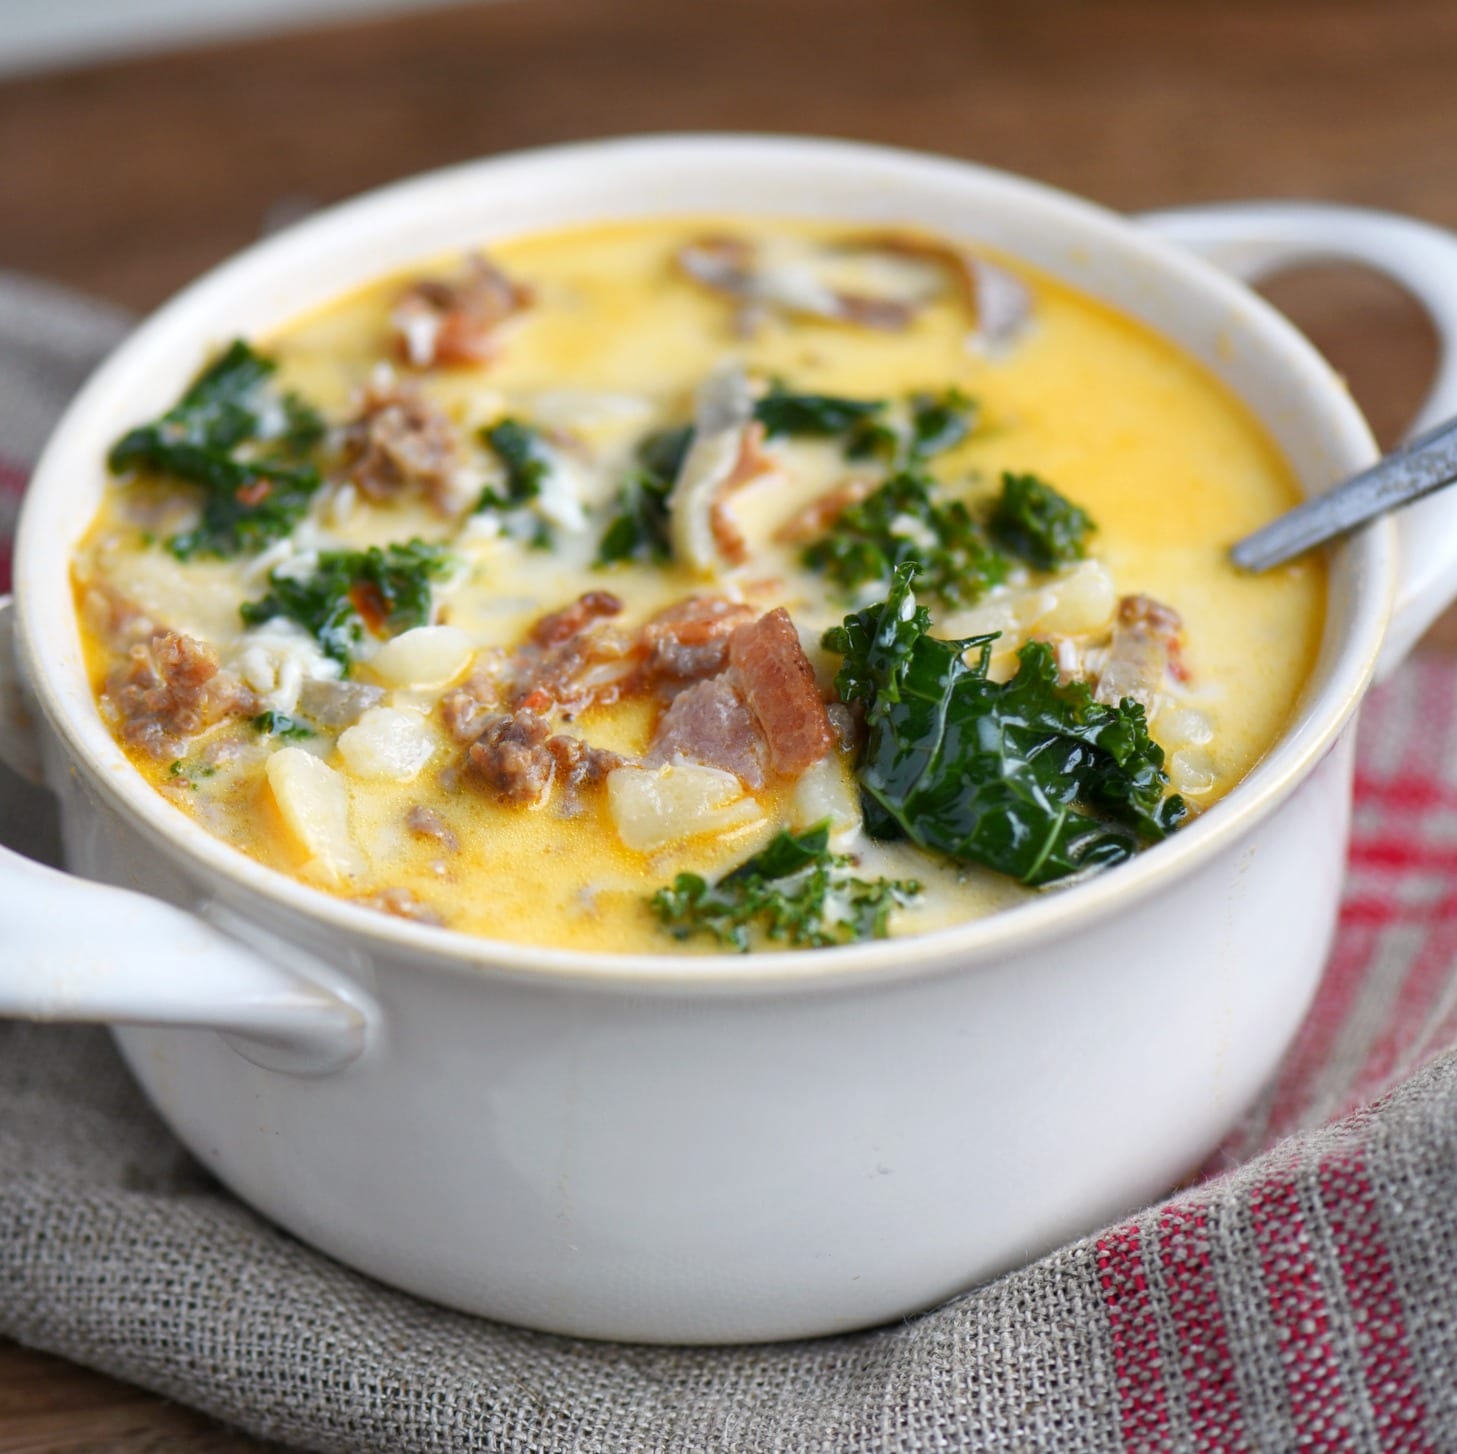 How to make Zuppa Toscana at home